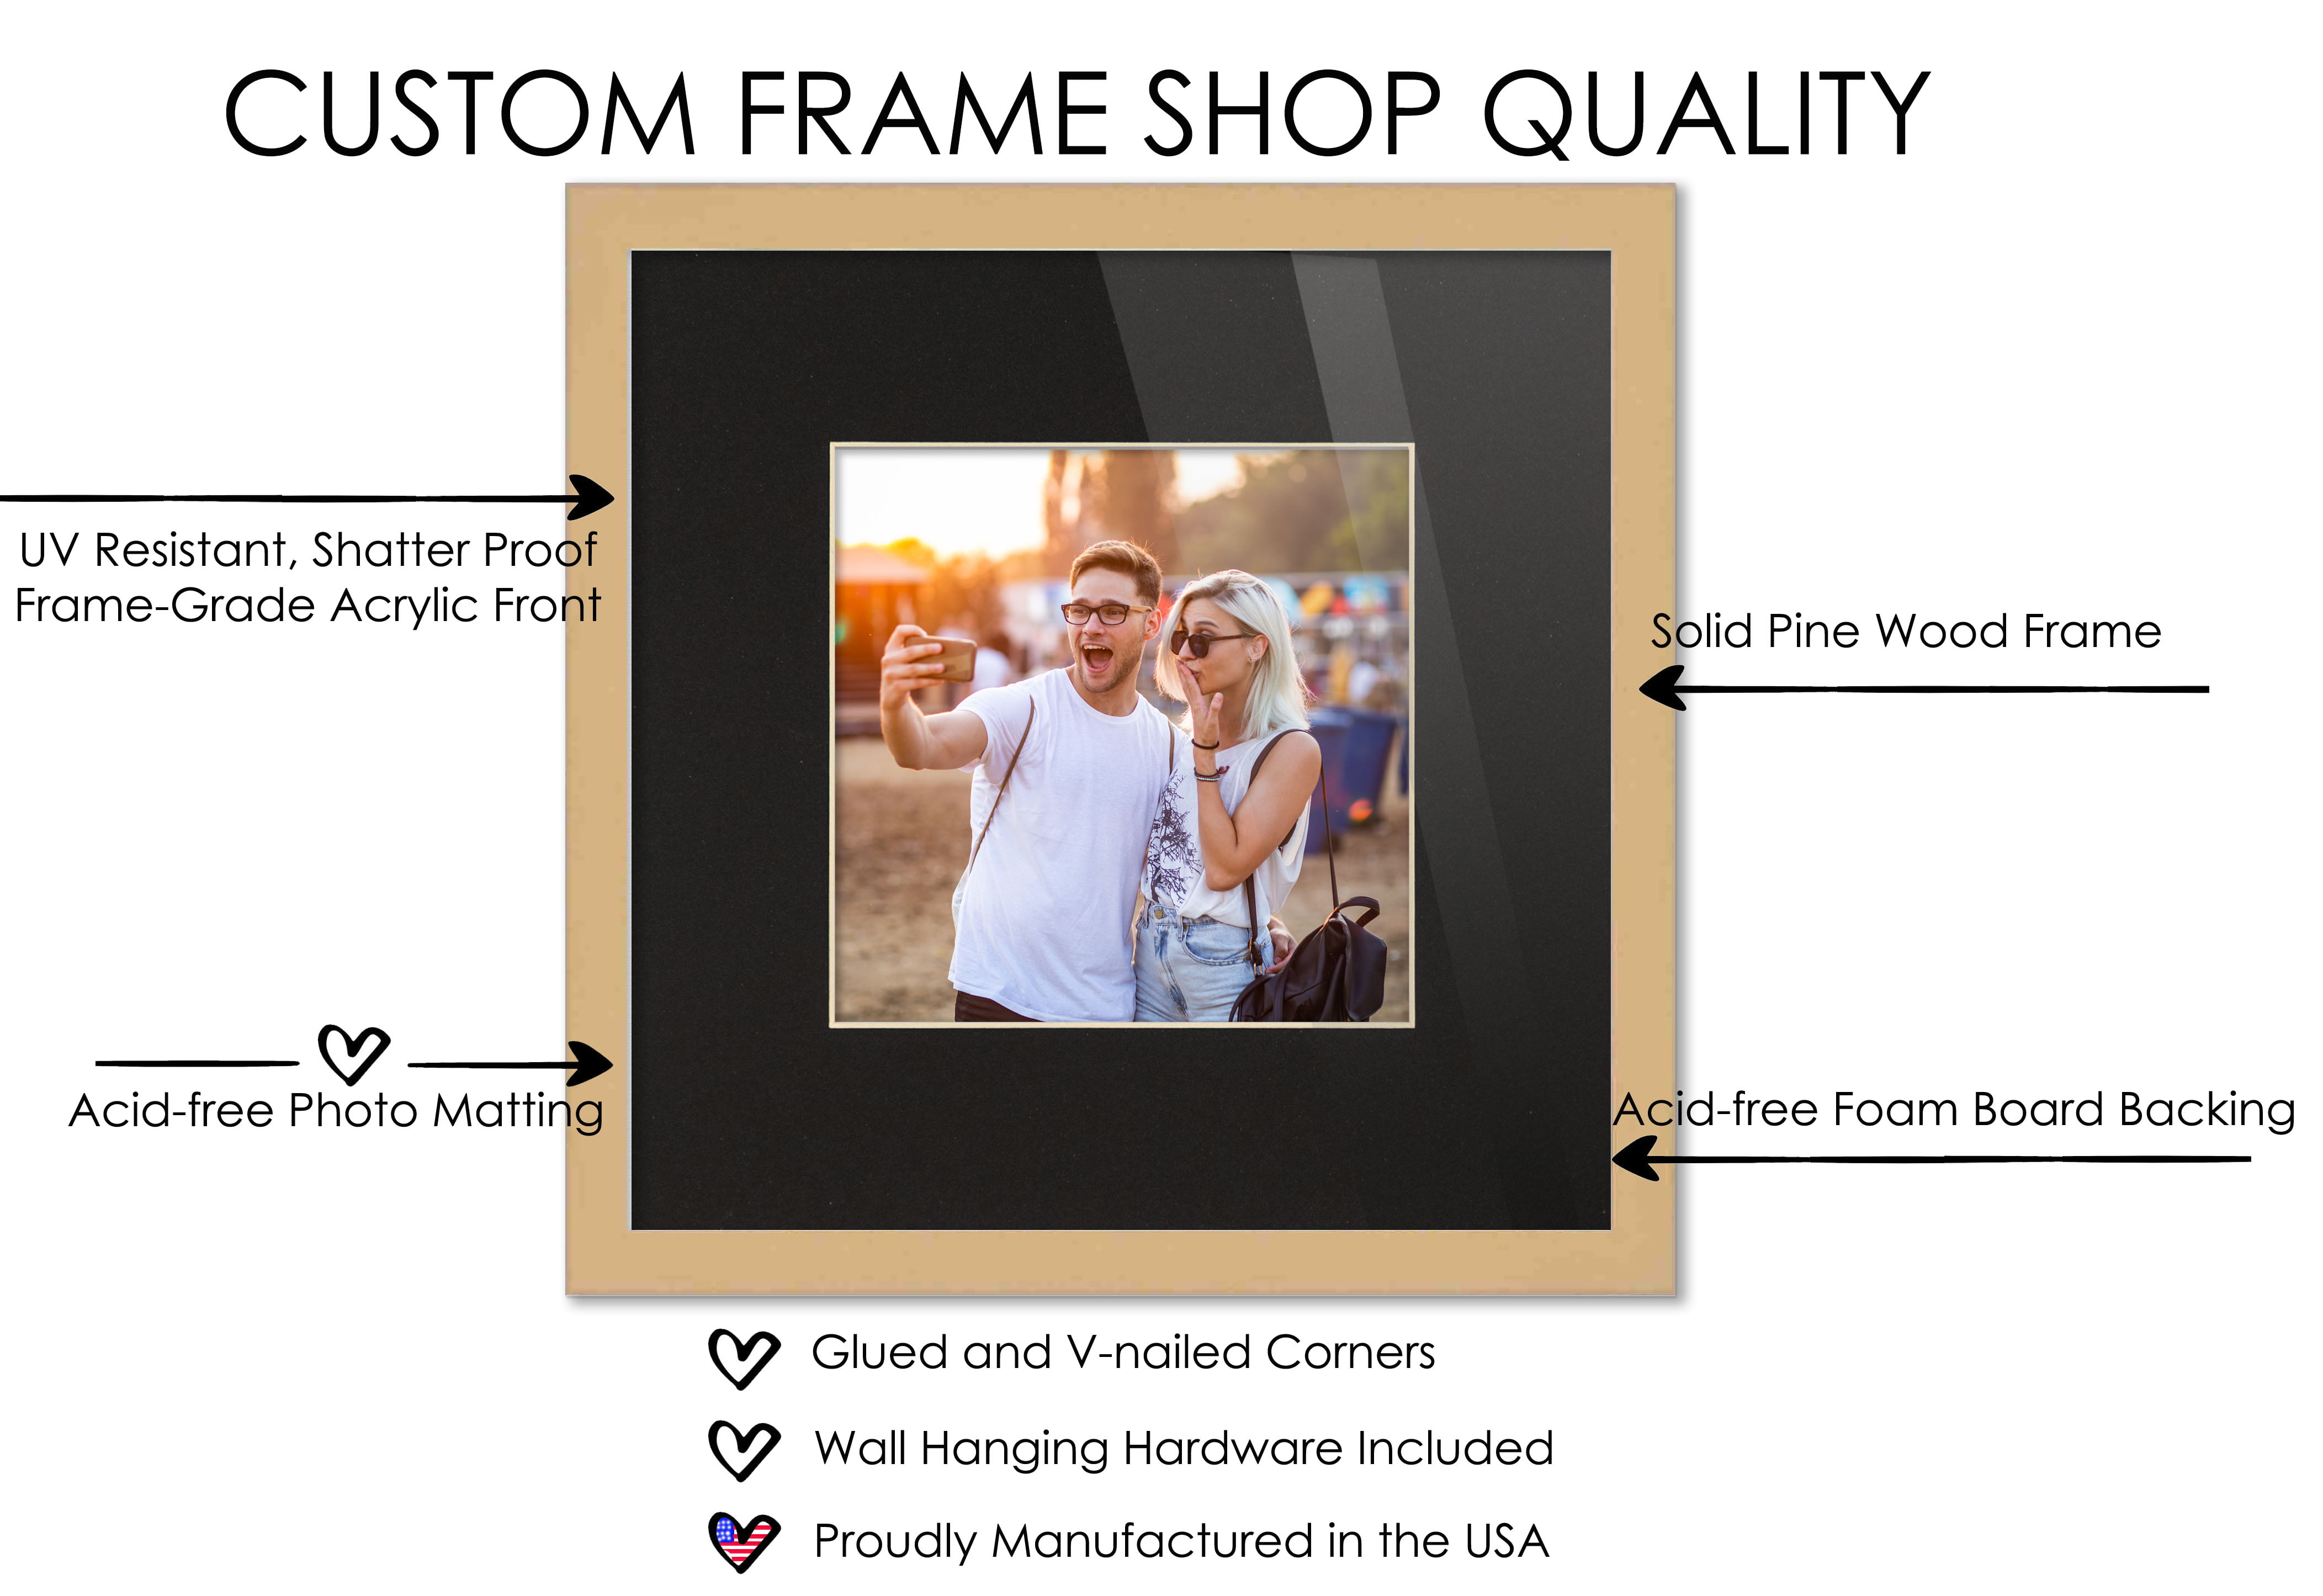 4x4 Frame with Mat - White 8x8 Frame Wood Made to Display Print or Poster  Measuring 4 x 4 Inches with Black Photo Mat - Yahoo Shopping